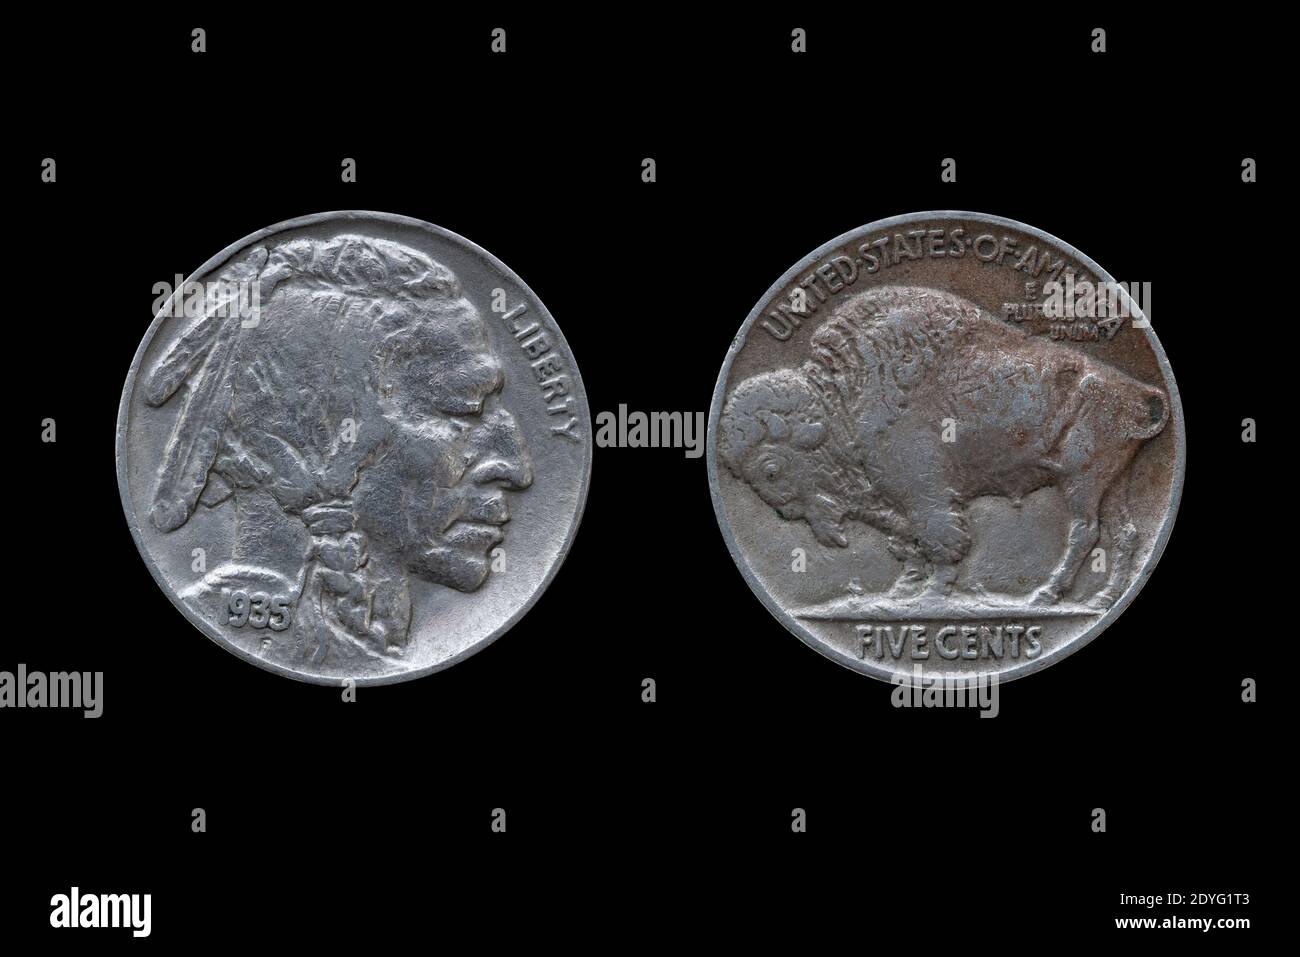 USA five cents Buffalo Indian Head nickel coin dated 1935 front and back (obverse and reverse) cut out and isolated on a black background, stock photo Stock Photo